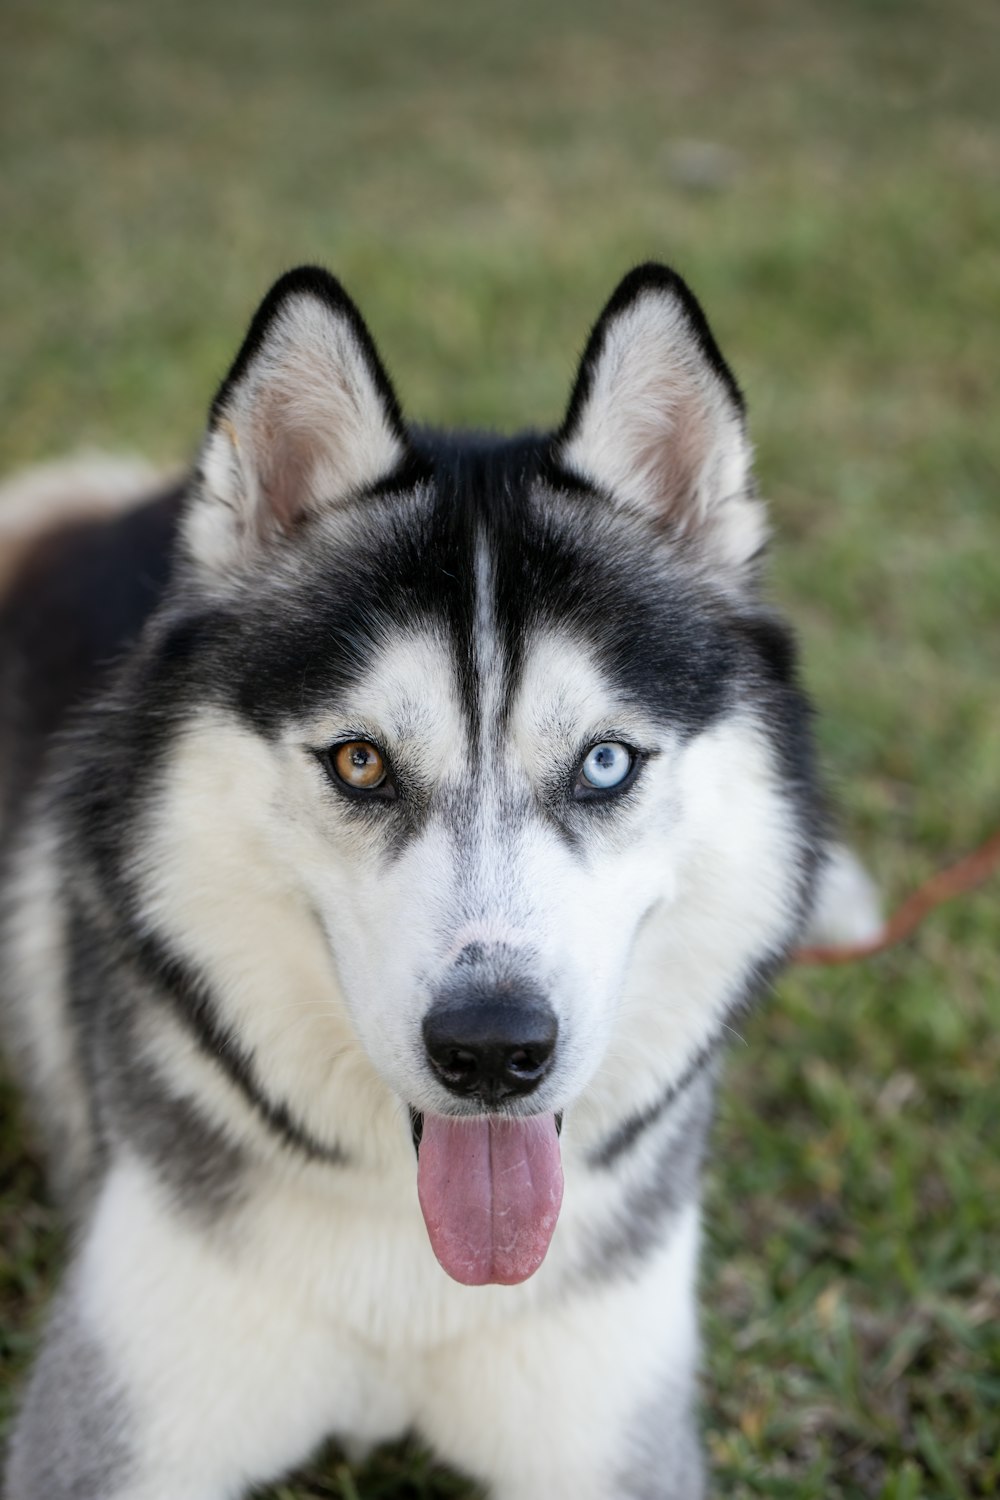 a black and white husky dog with blue eyes